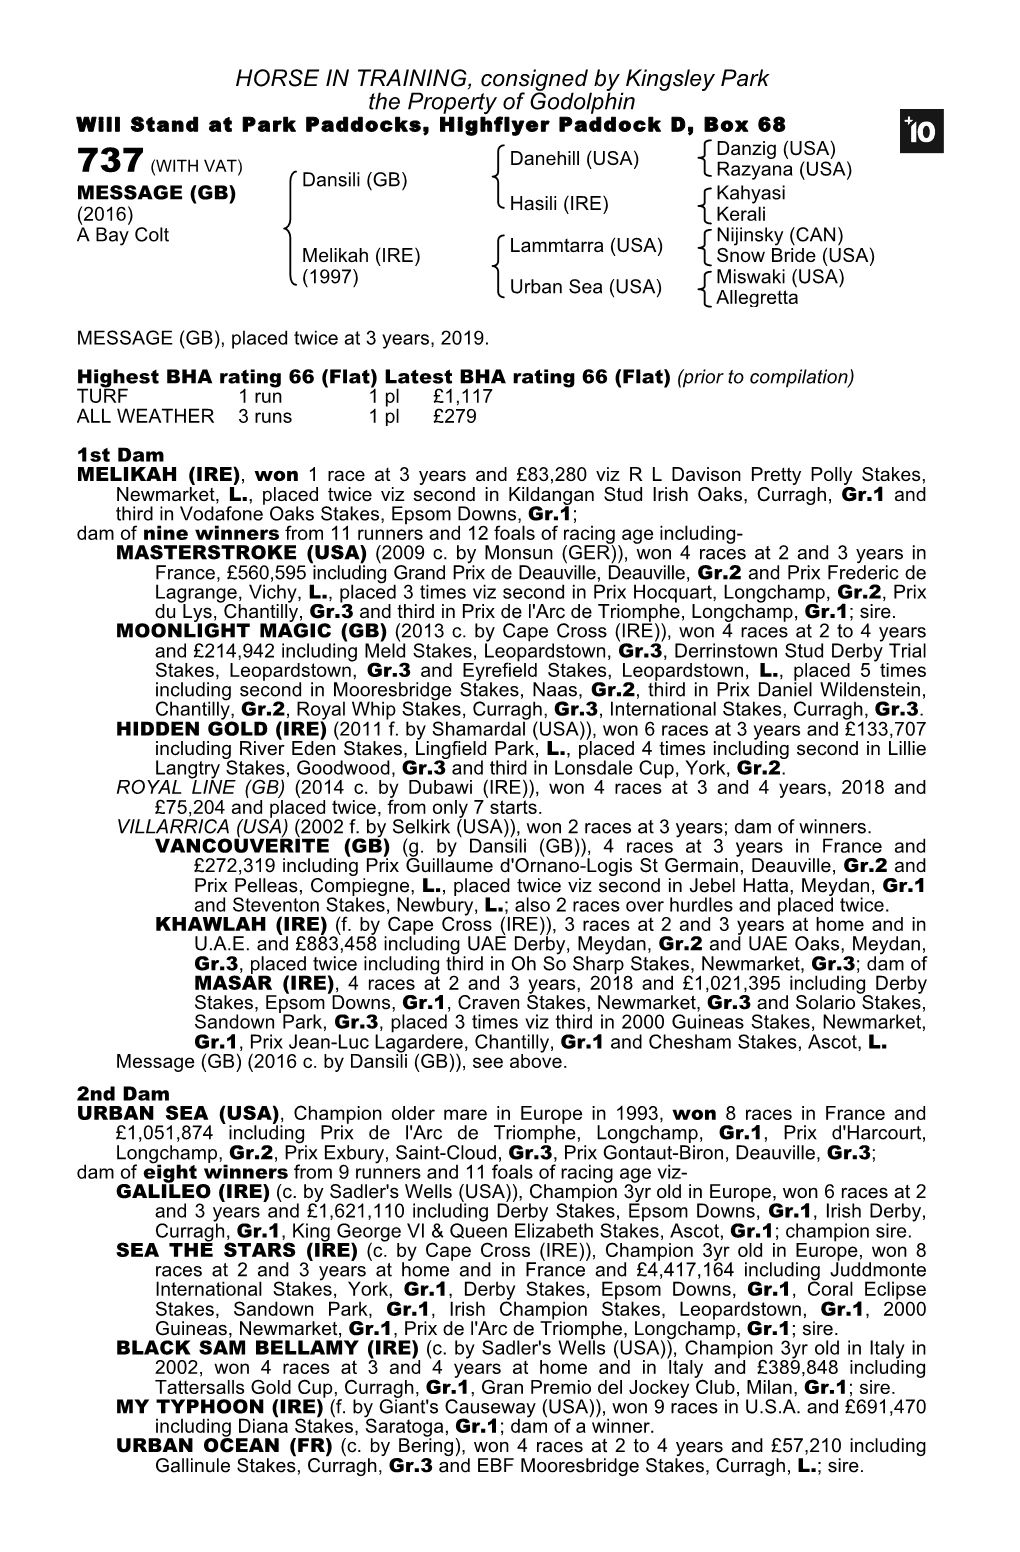 HORSE in TRAINING, Consigned by Kingsley Park the Property of Godolphin